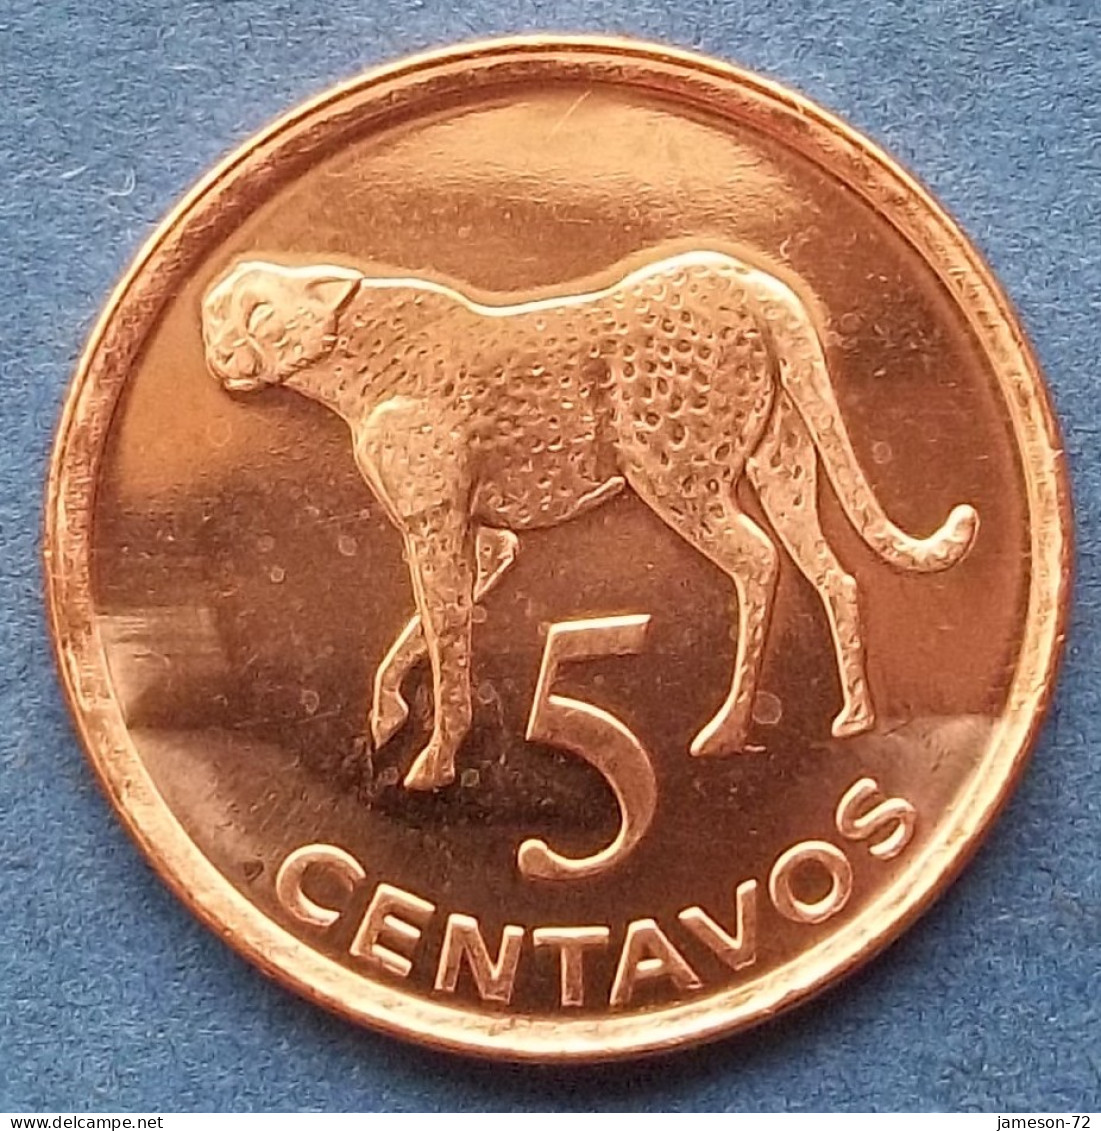 MOZAMBIQUE - 5 Centavos 2006 "Cheetah" KM# 133 Peoples Republic Reform Coinage (2006) - Edelweiss Coins - Mosambik